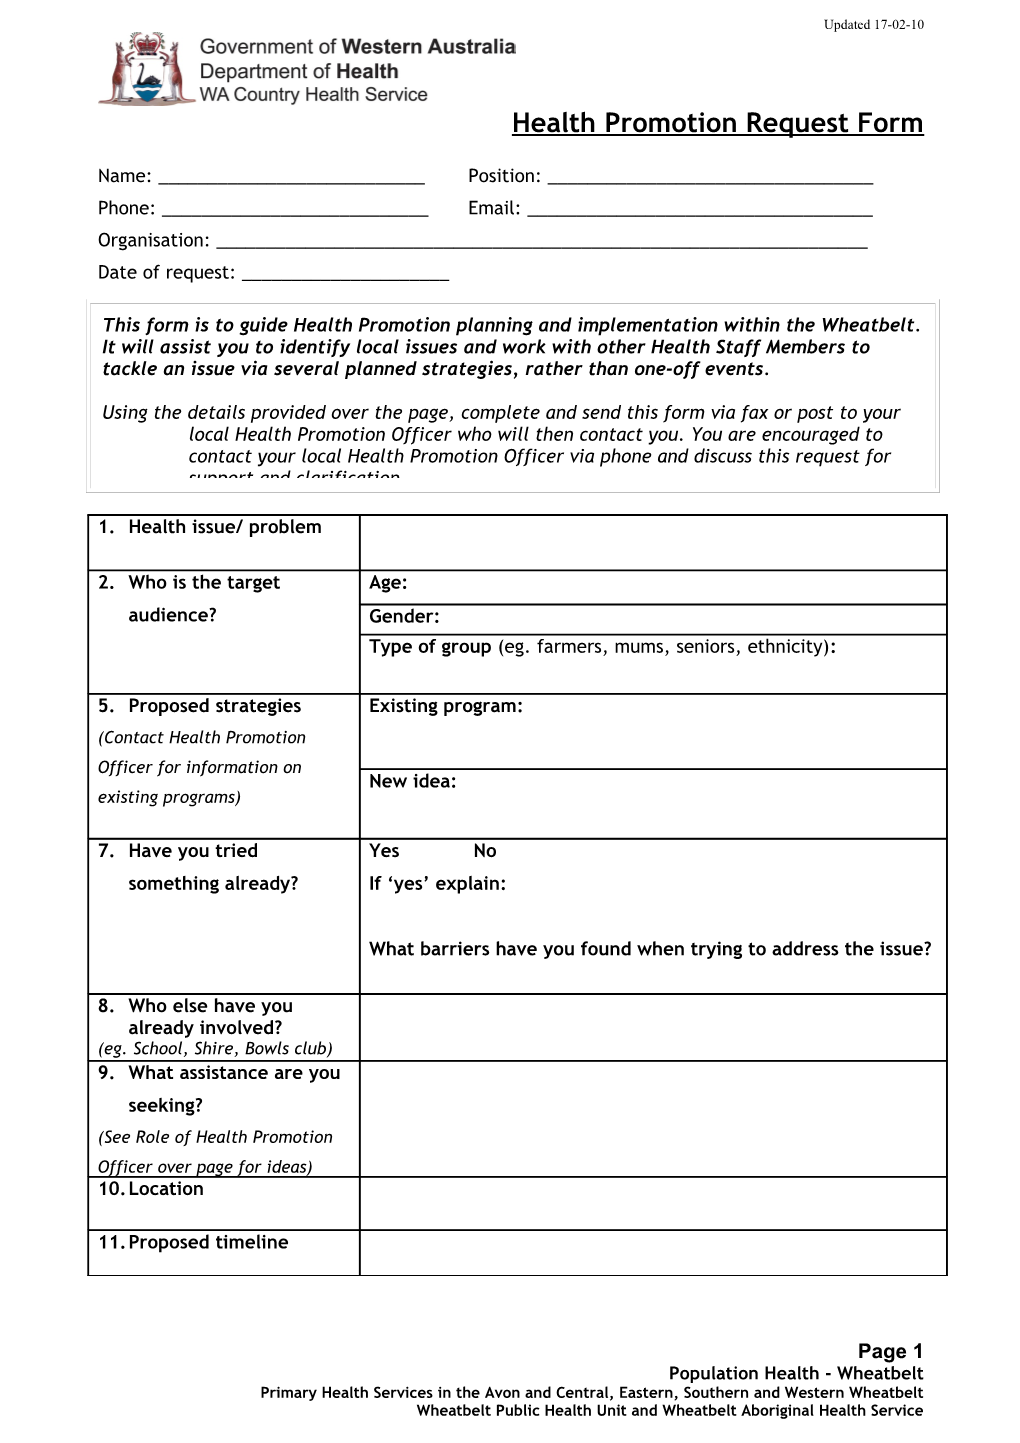 Health Promotion Request Form